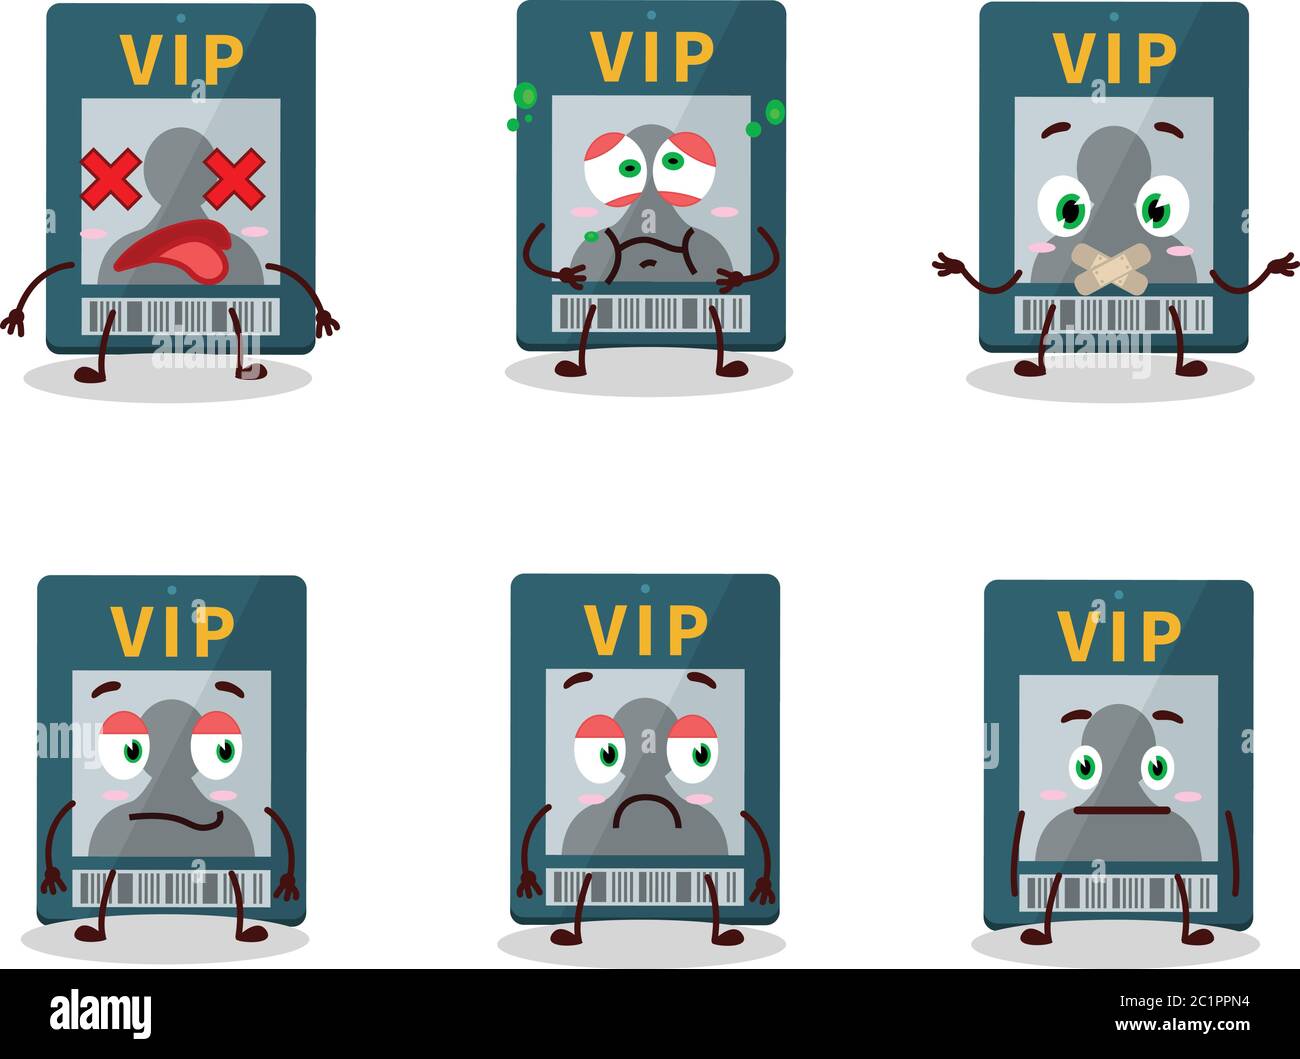 Vip card cartoon character with nope expression Stock Vector